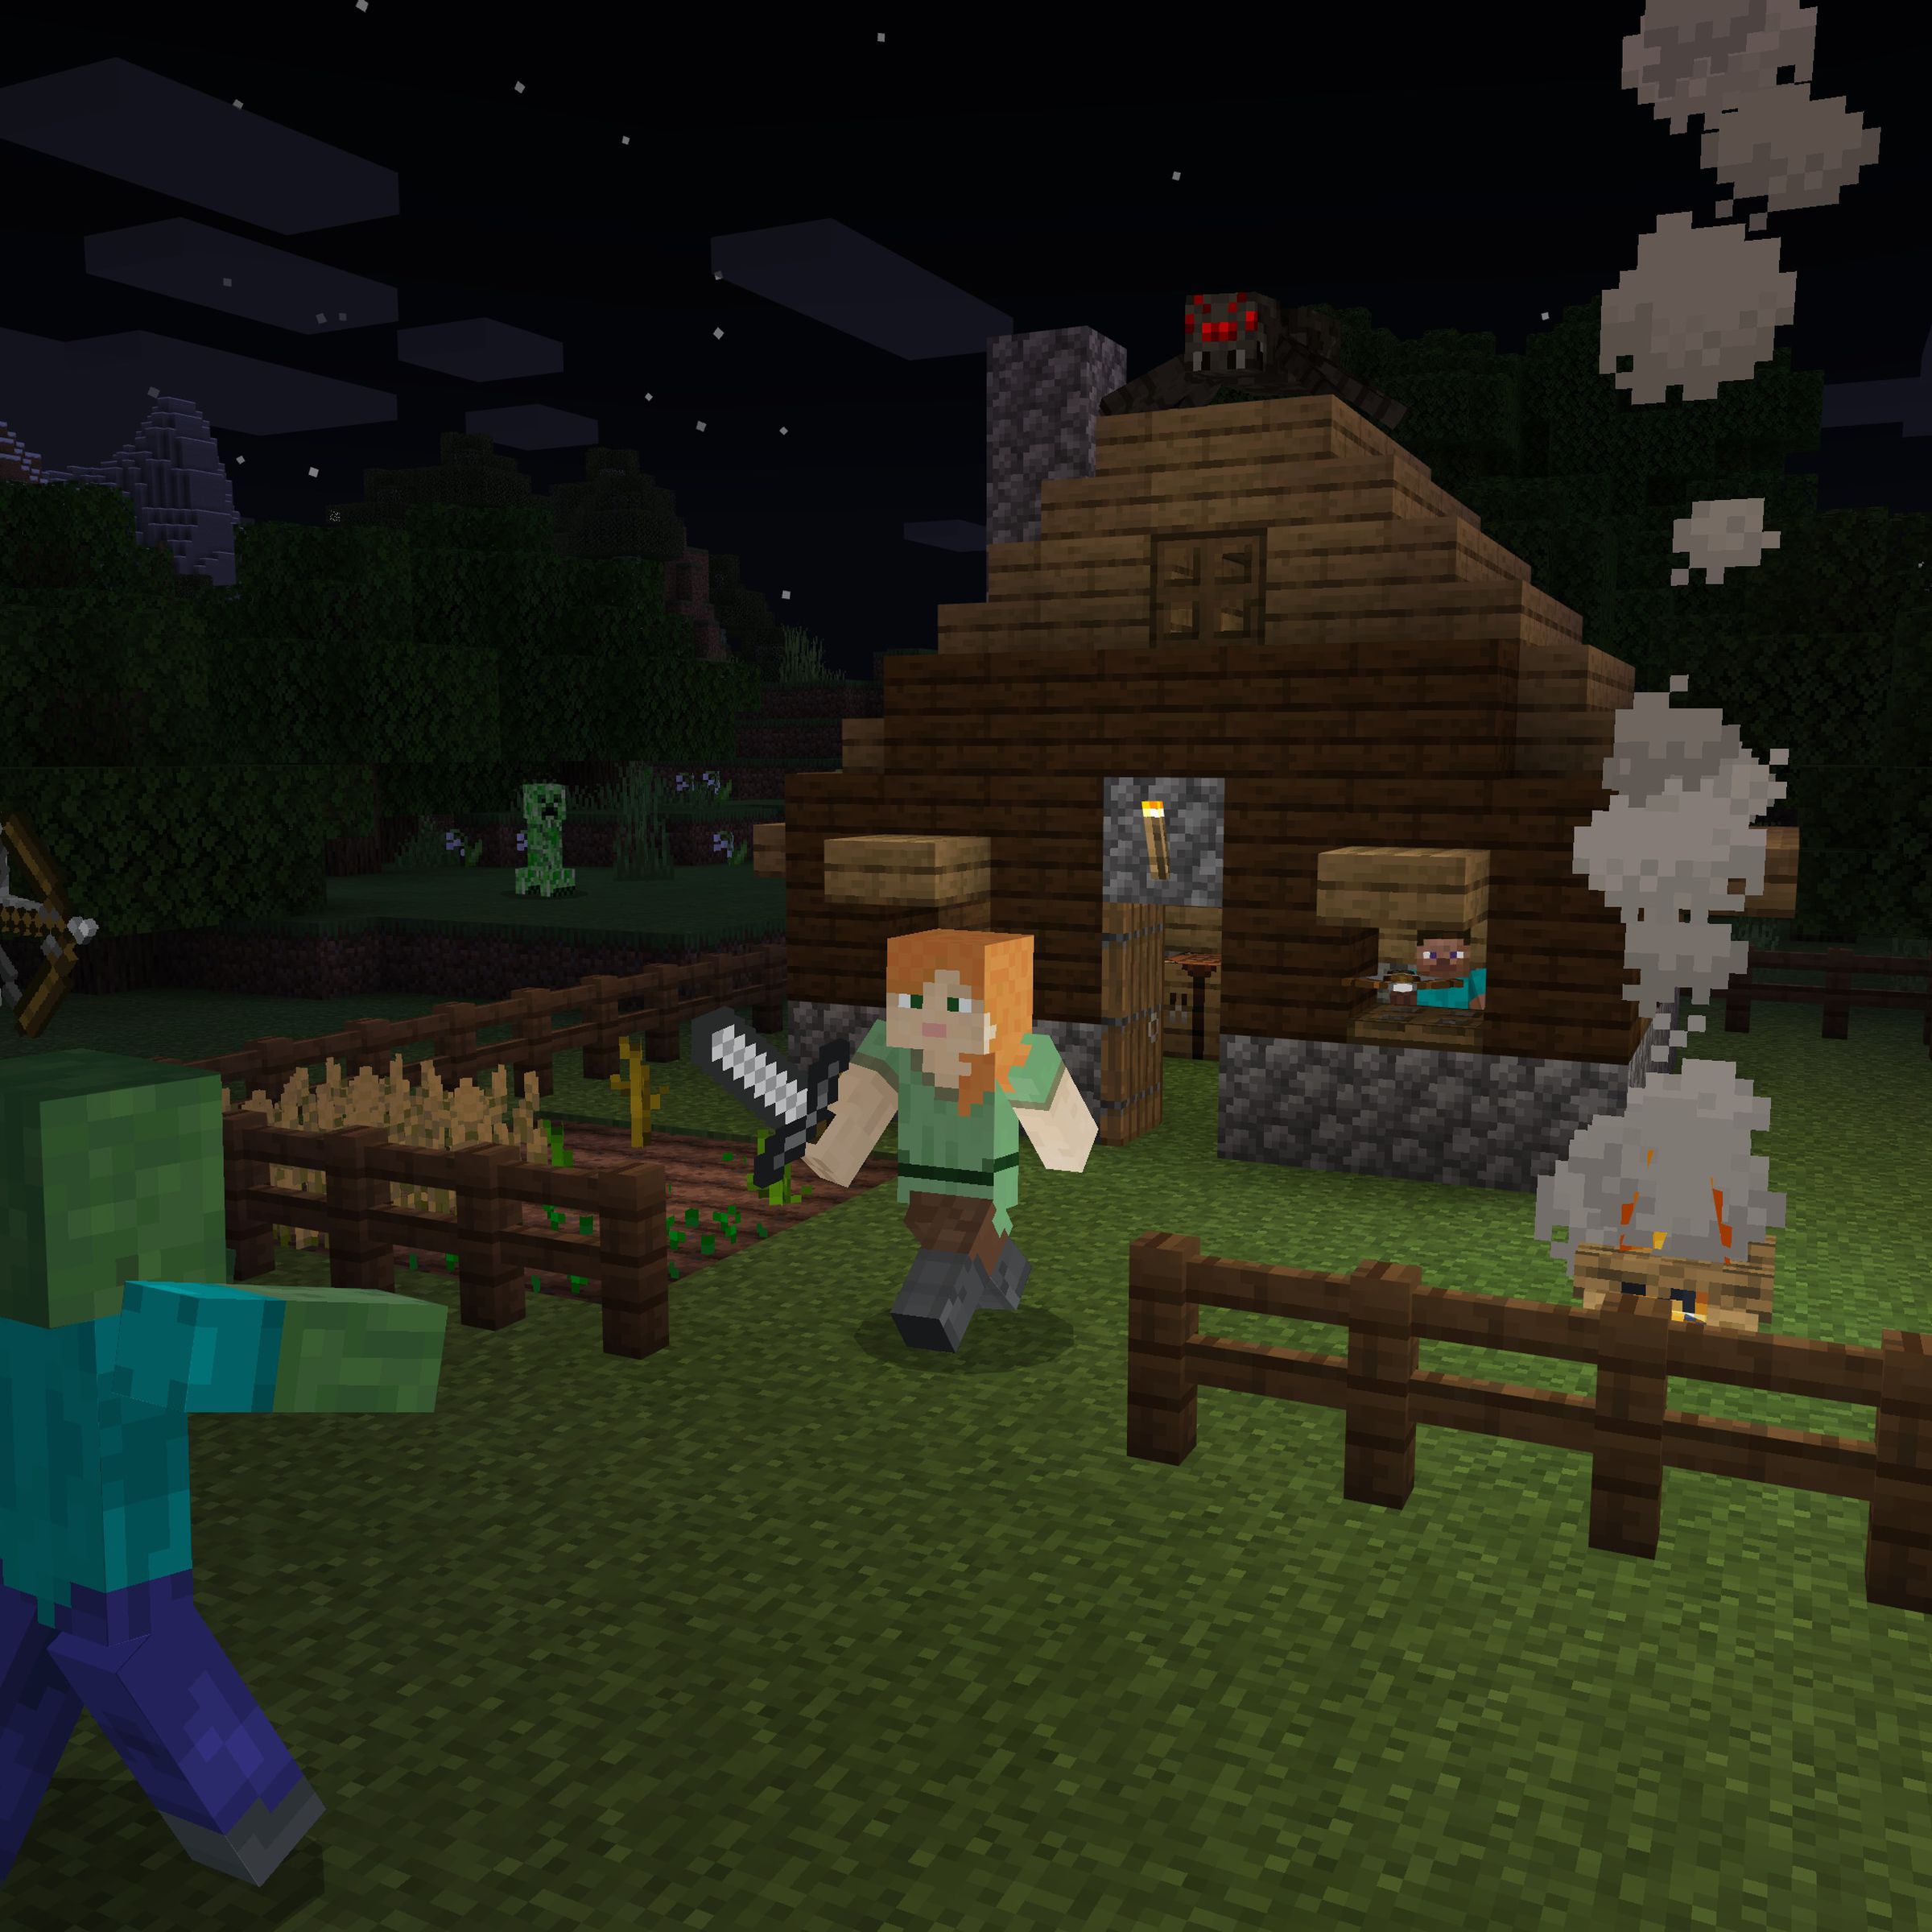 A screenshot of the video game Minecraft.